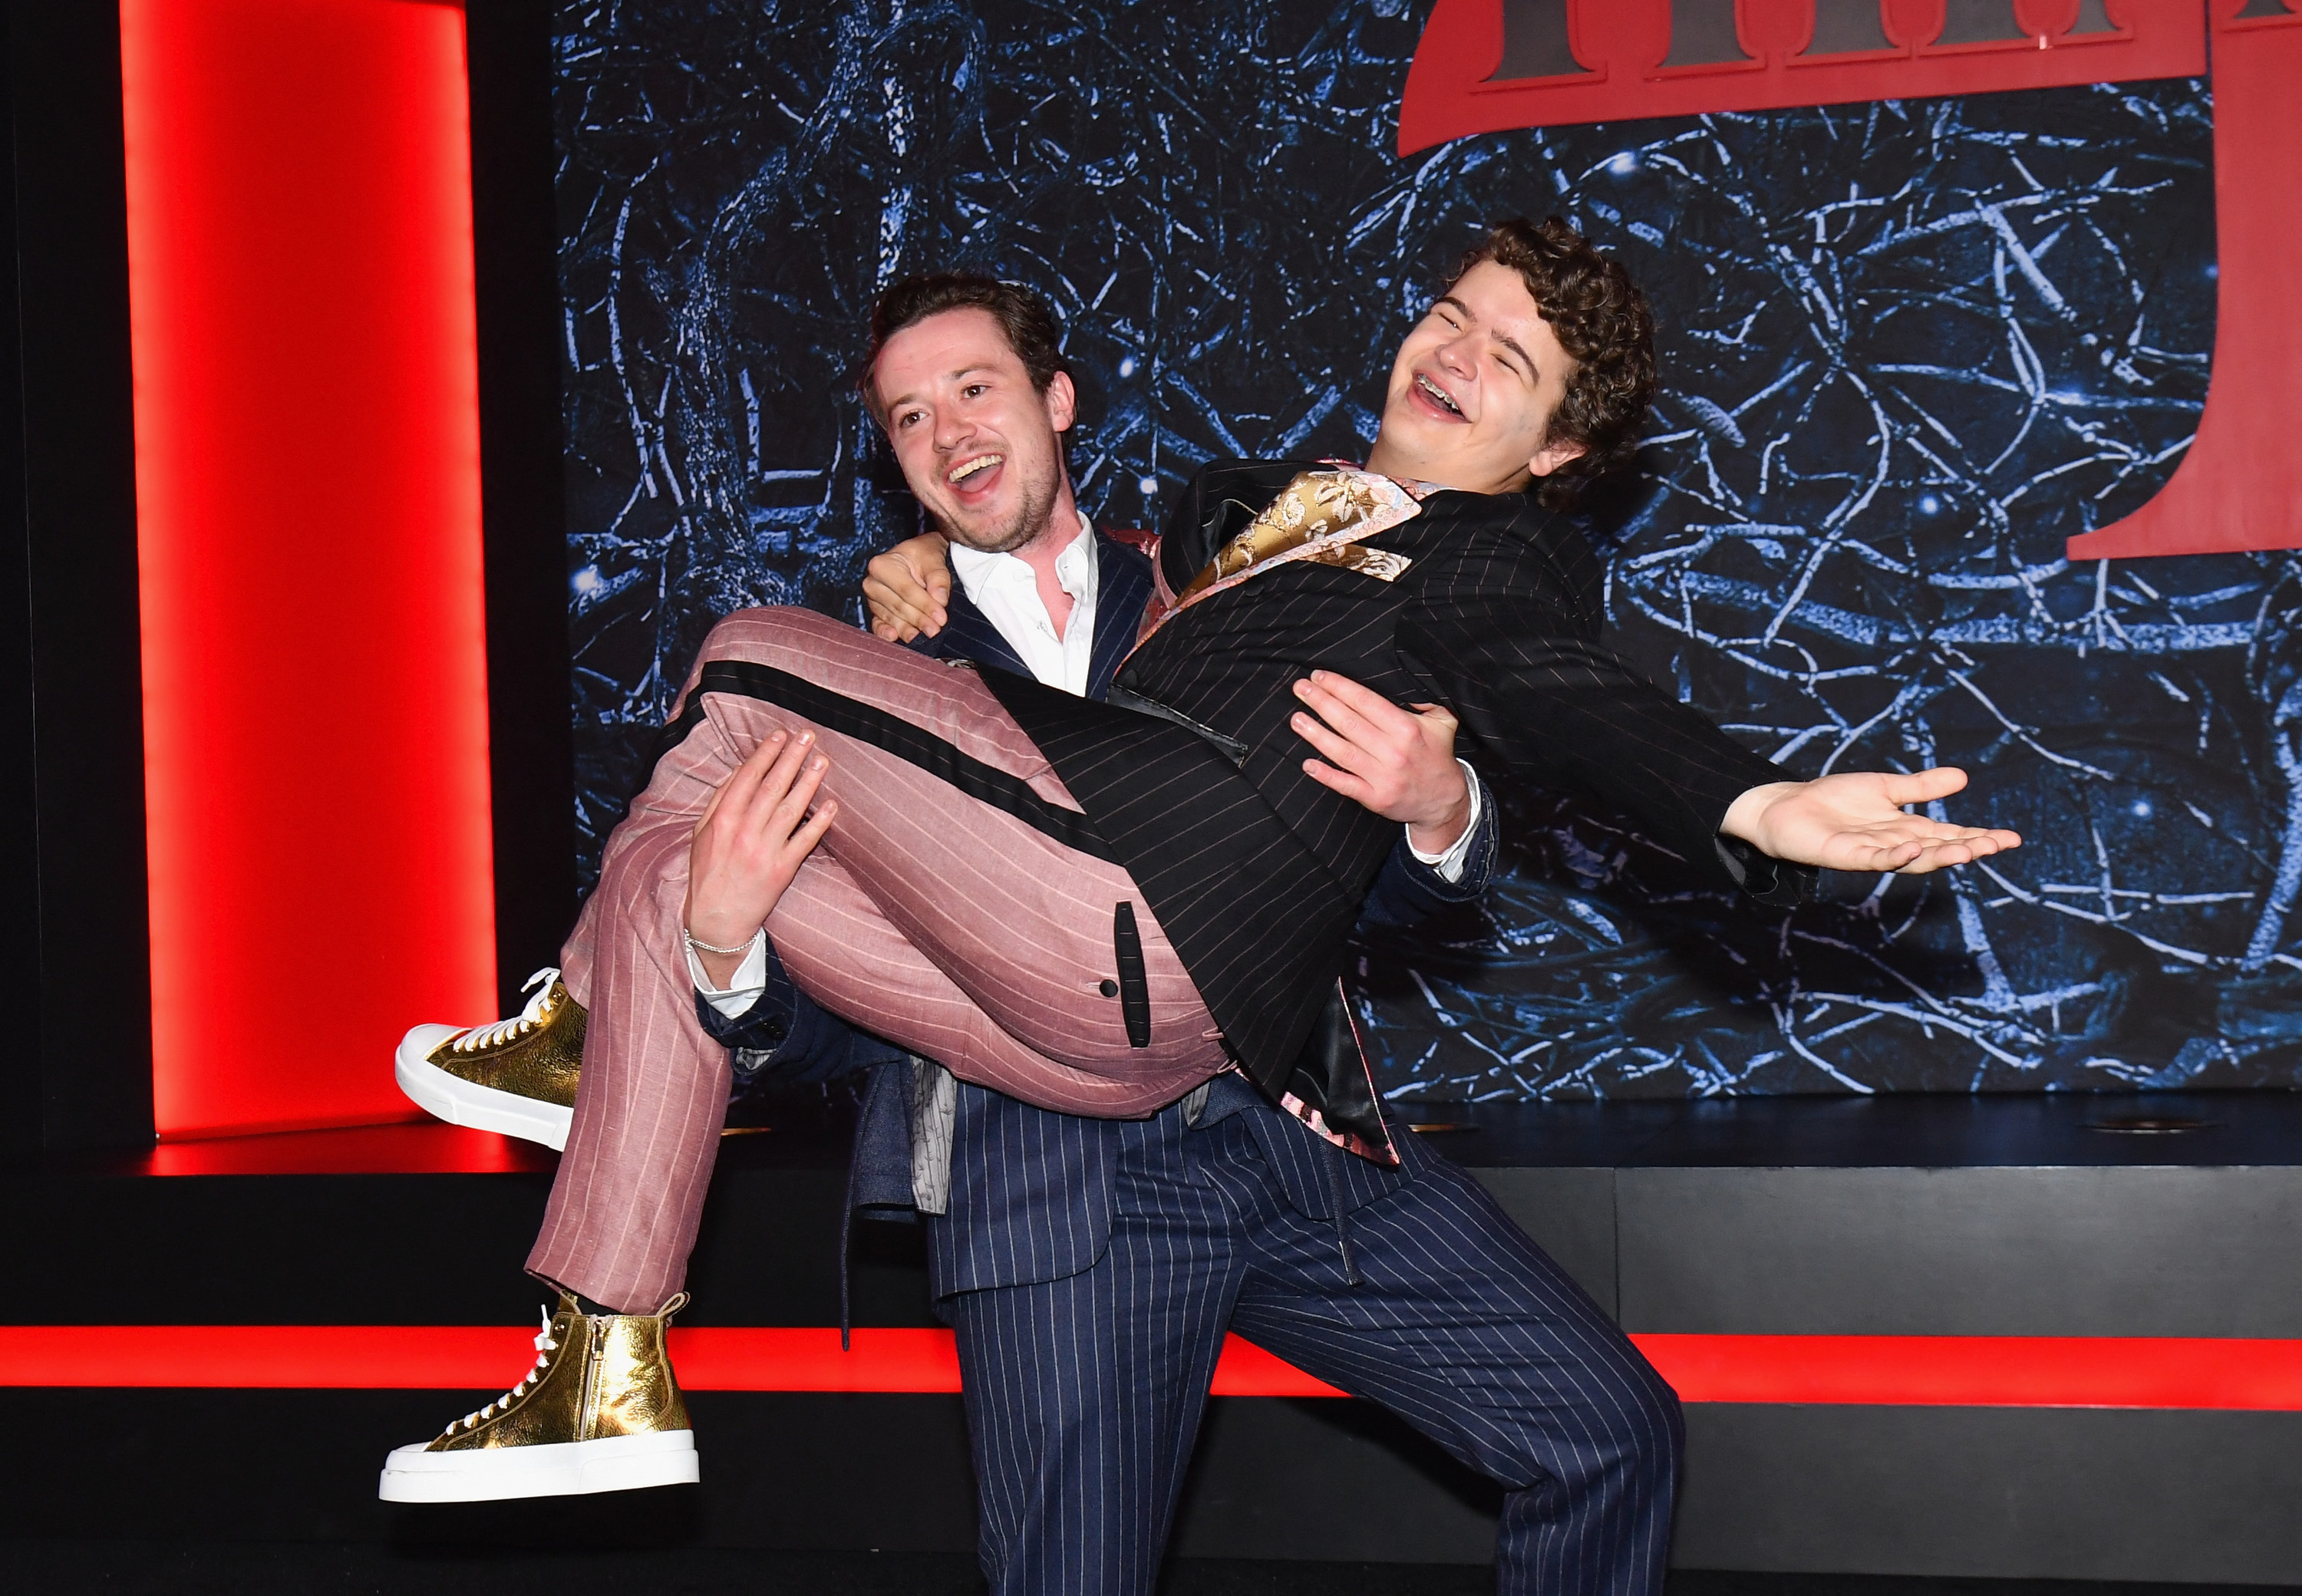 Gaten laughing while being carried on the red carpet